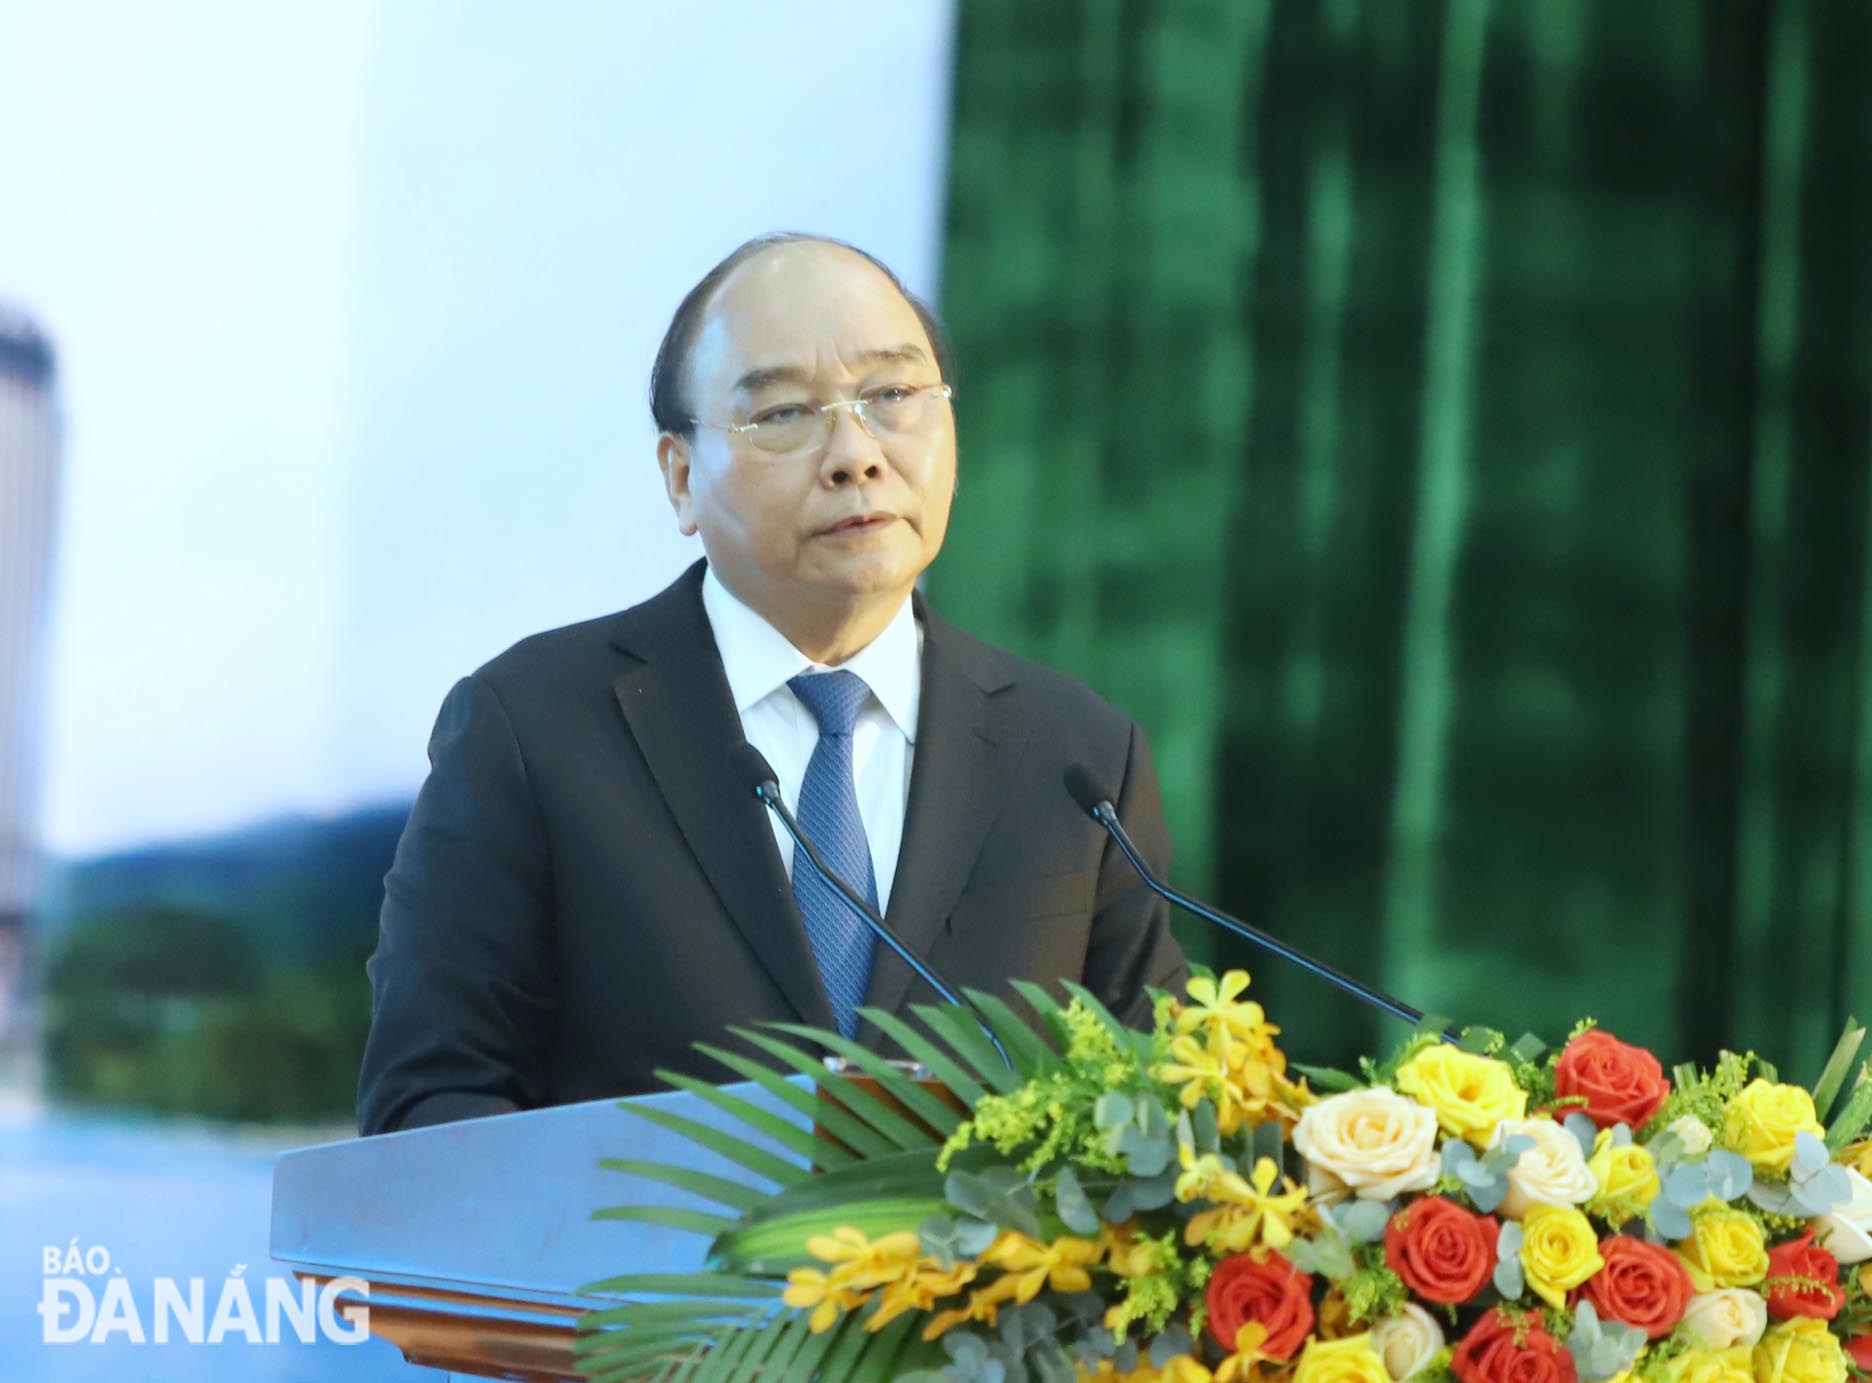 Vietnamese State President Nguyen Xuan Phuc delivers his instructions at a seminar themed ‘Da Nang’s 25-year journey: Achievements and prospects’, December 28, 2021. Photo: NGOC PHU